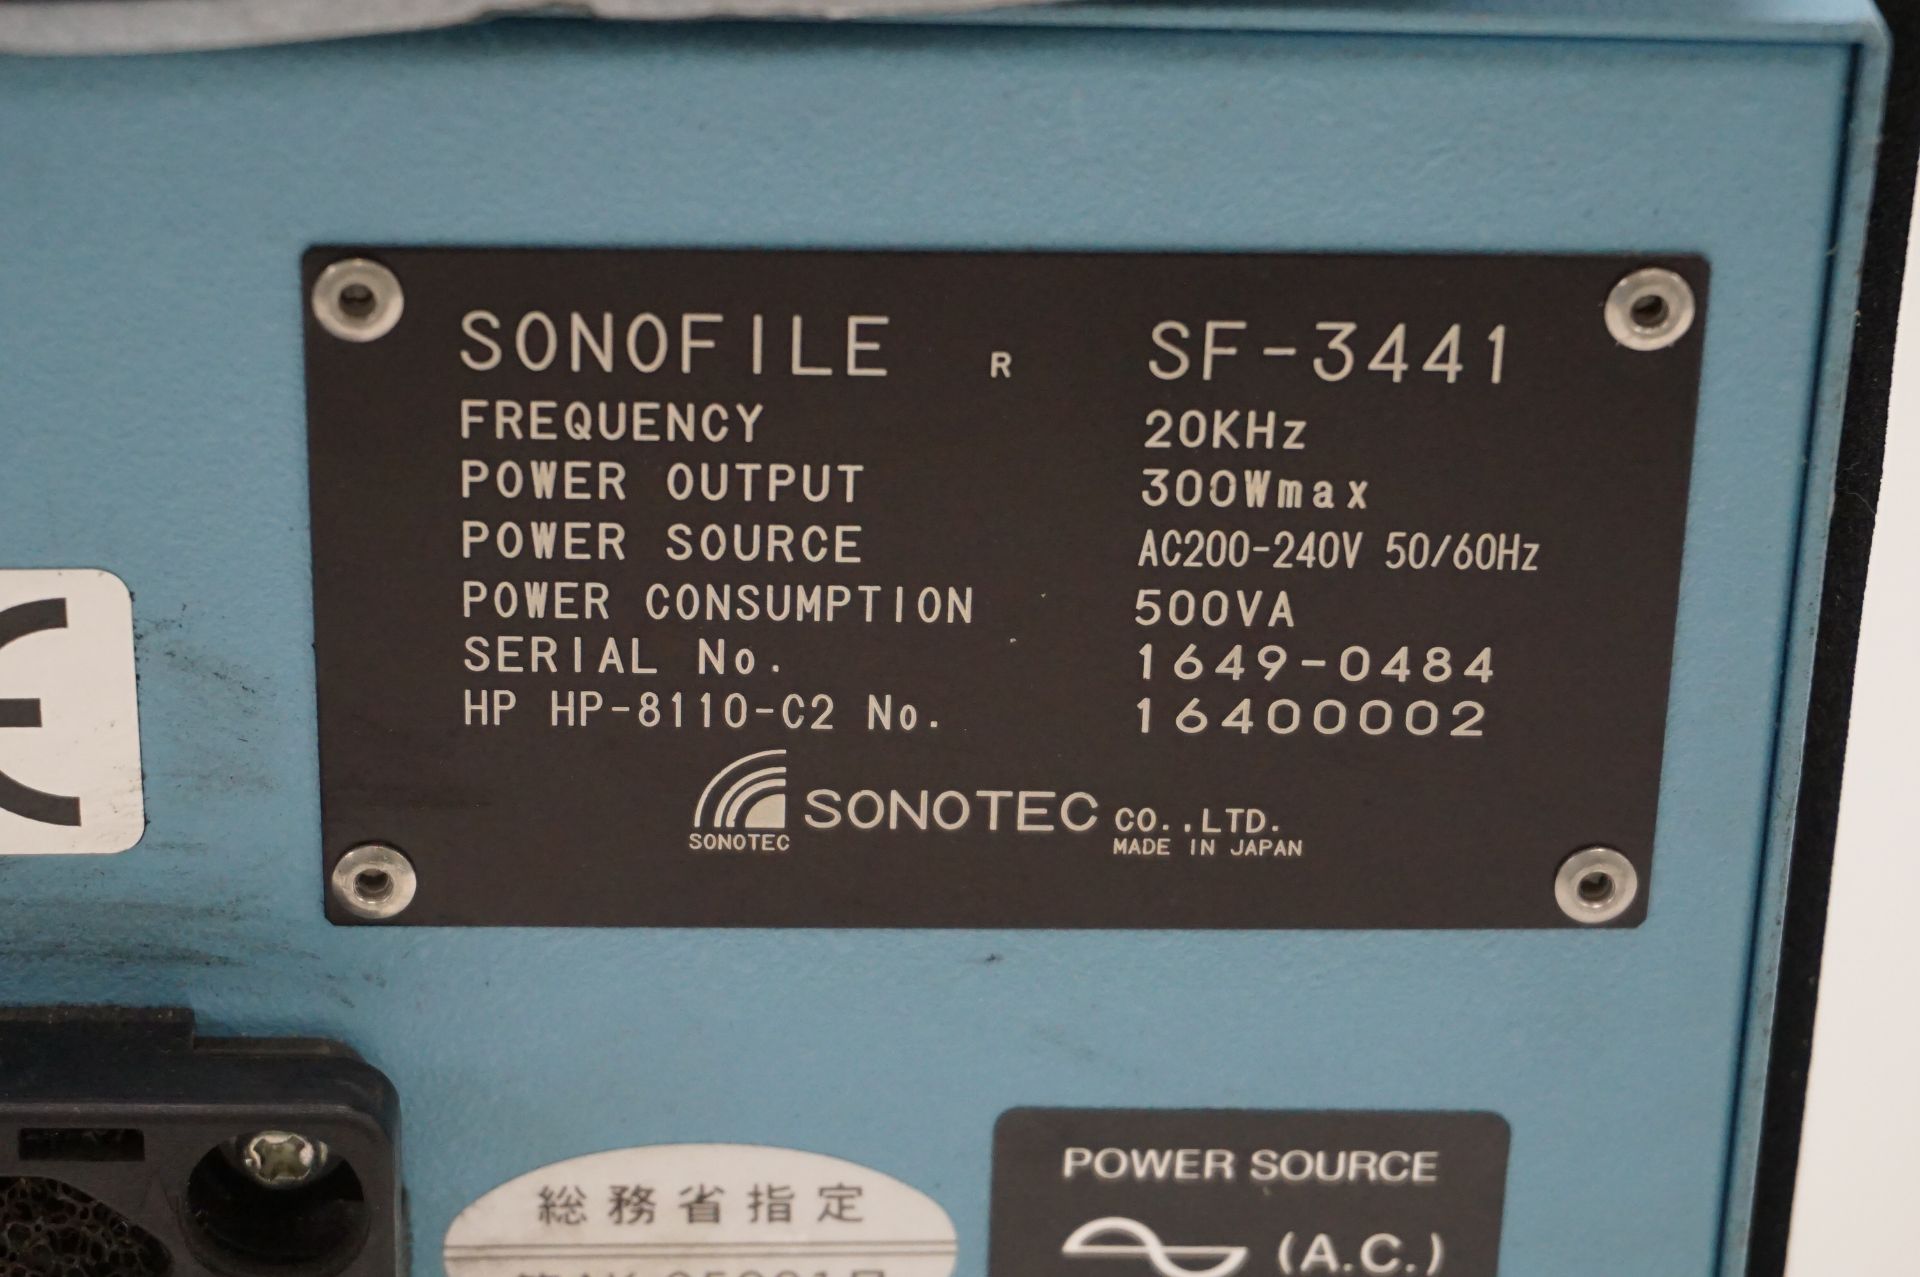 2 x Sonofile SF-3441 ultrasonic cutters - Image 6 of 9